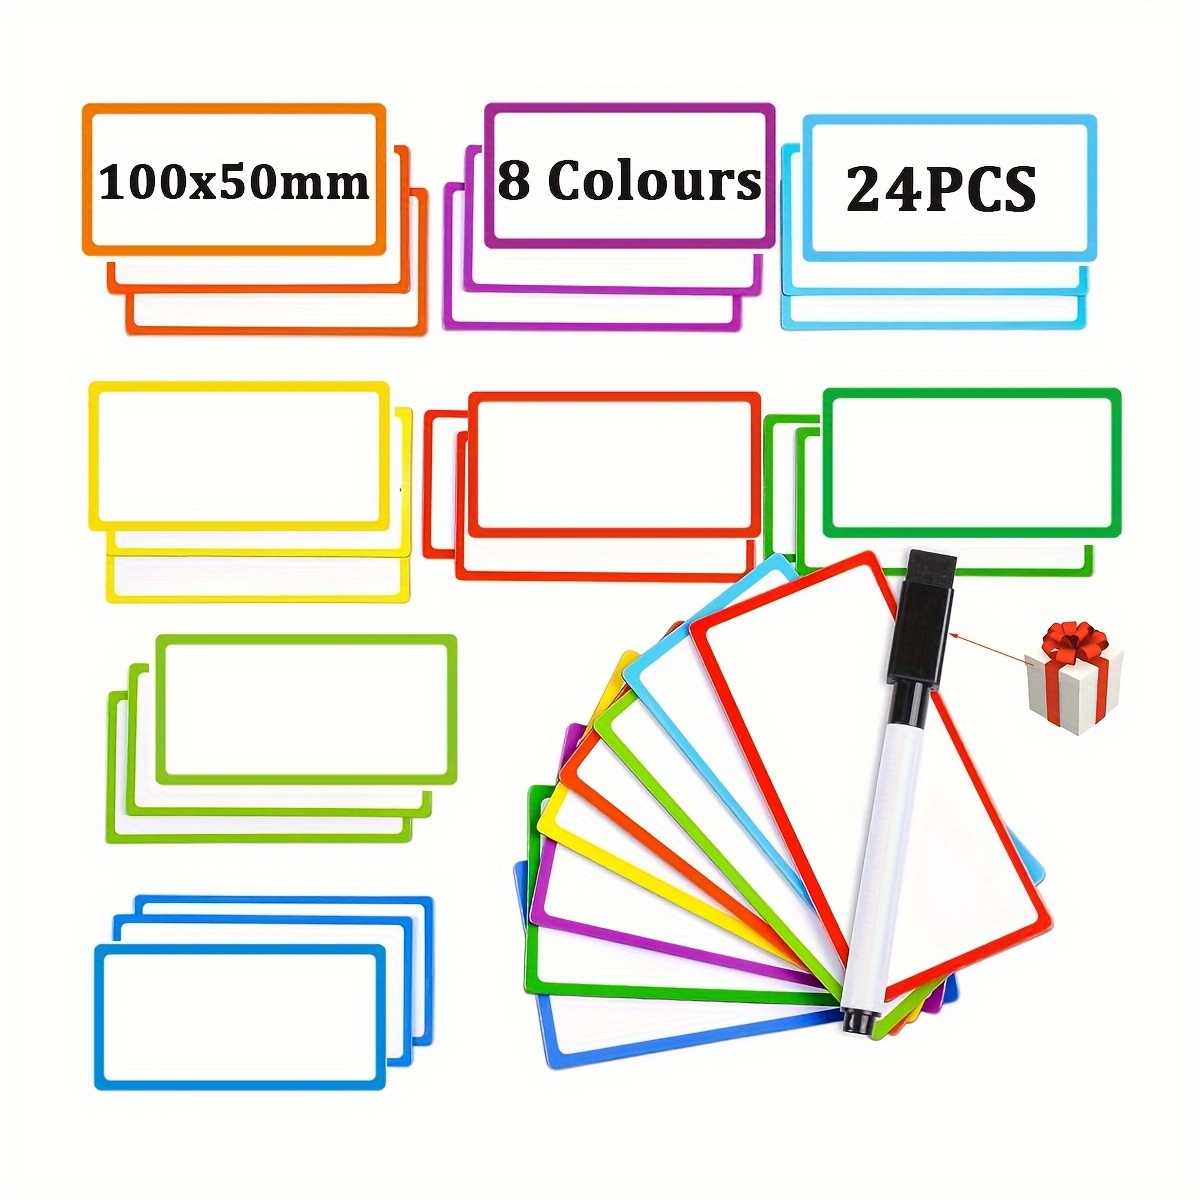 Dry Erase Magnetic Stickers for Whiteboards - Sticky Labels and Stickers - Magnetic Name Tags - 30 Pcs